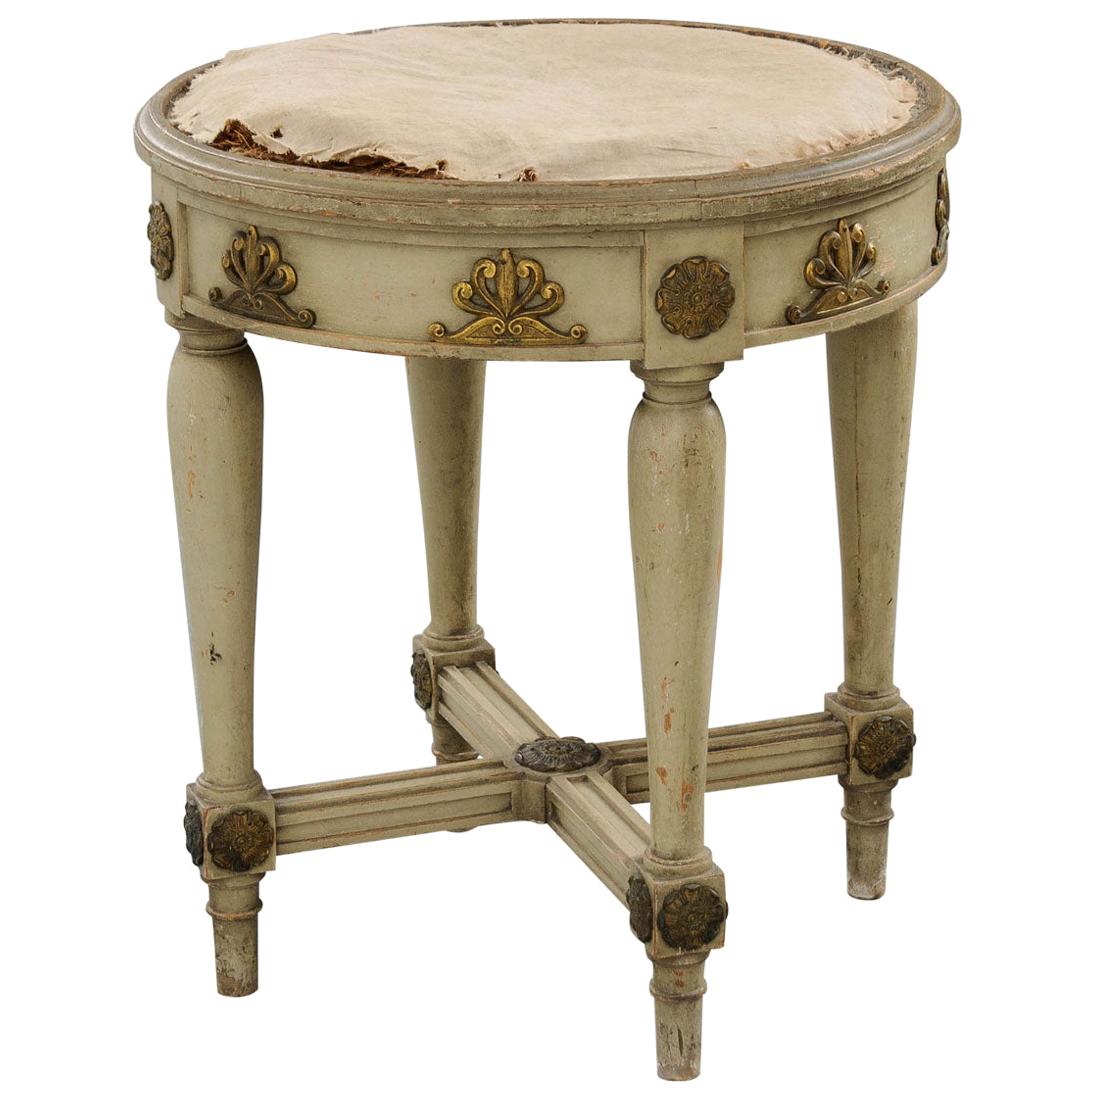 French Late 19th Century Painted Empire Stool